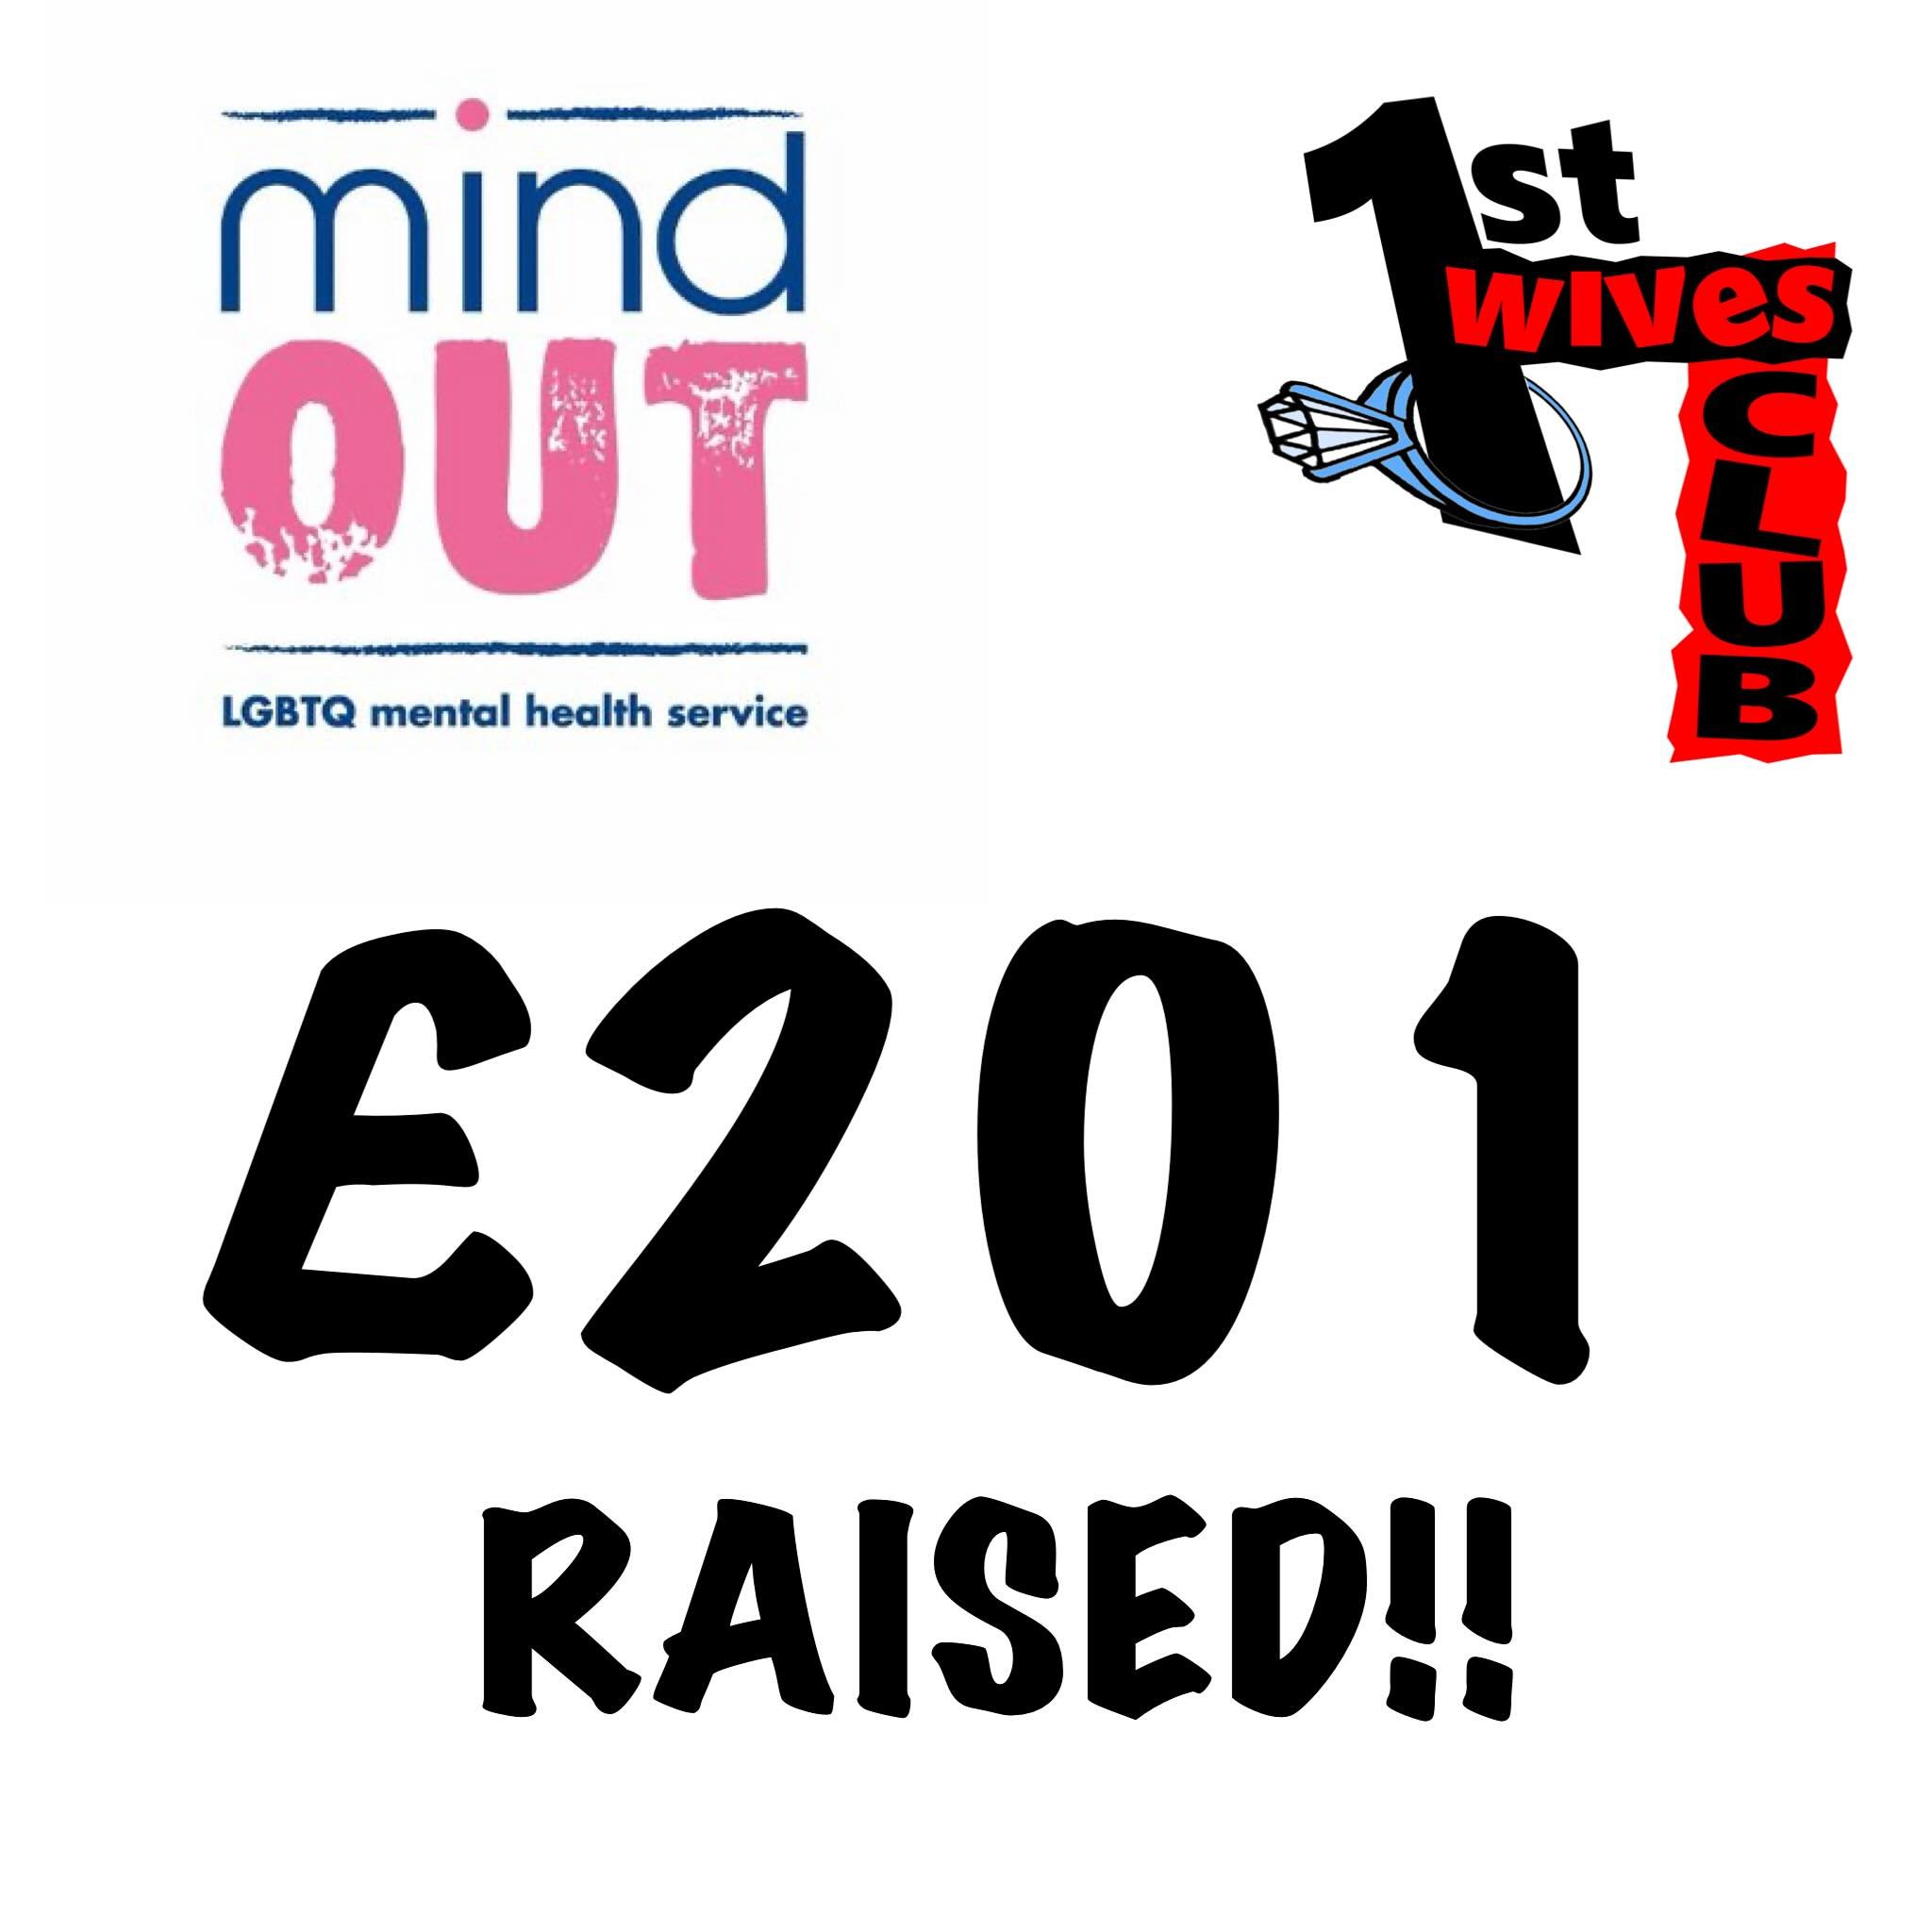 Thank you all for coming, having so much fun with us and being so generous! You donated an amazing &pound;201 last night for @mindoutlgbtq through bingo cards, the Diane Keaton-bola and our mega auction of gorgeous charity shop antiques!!! 

You guys